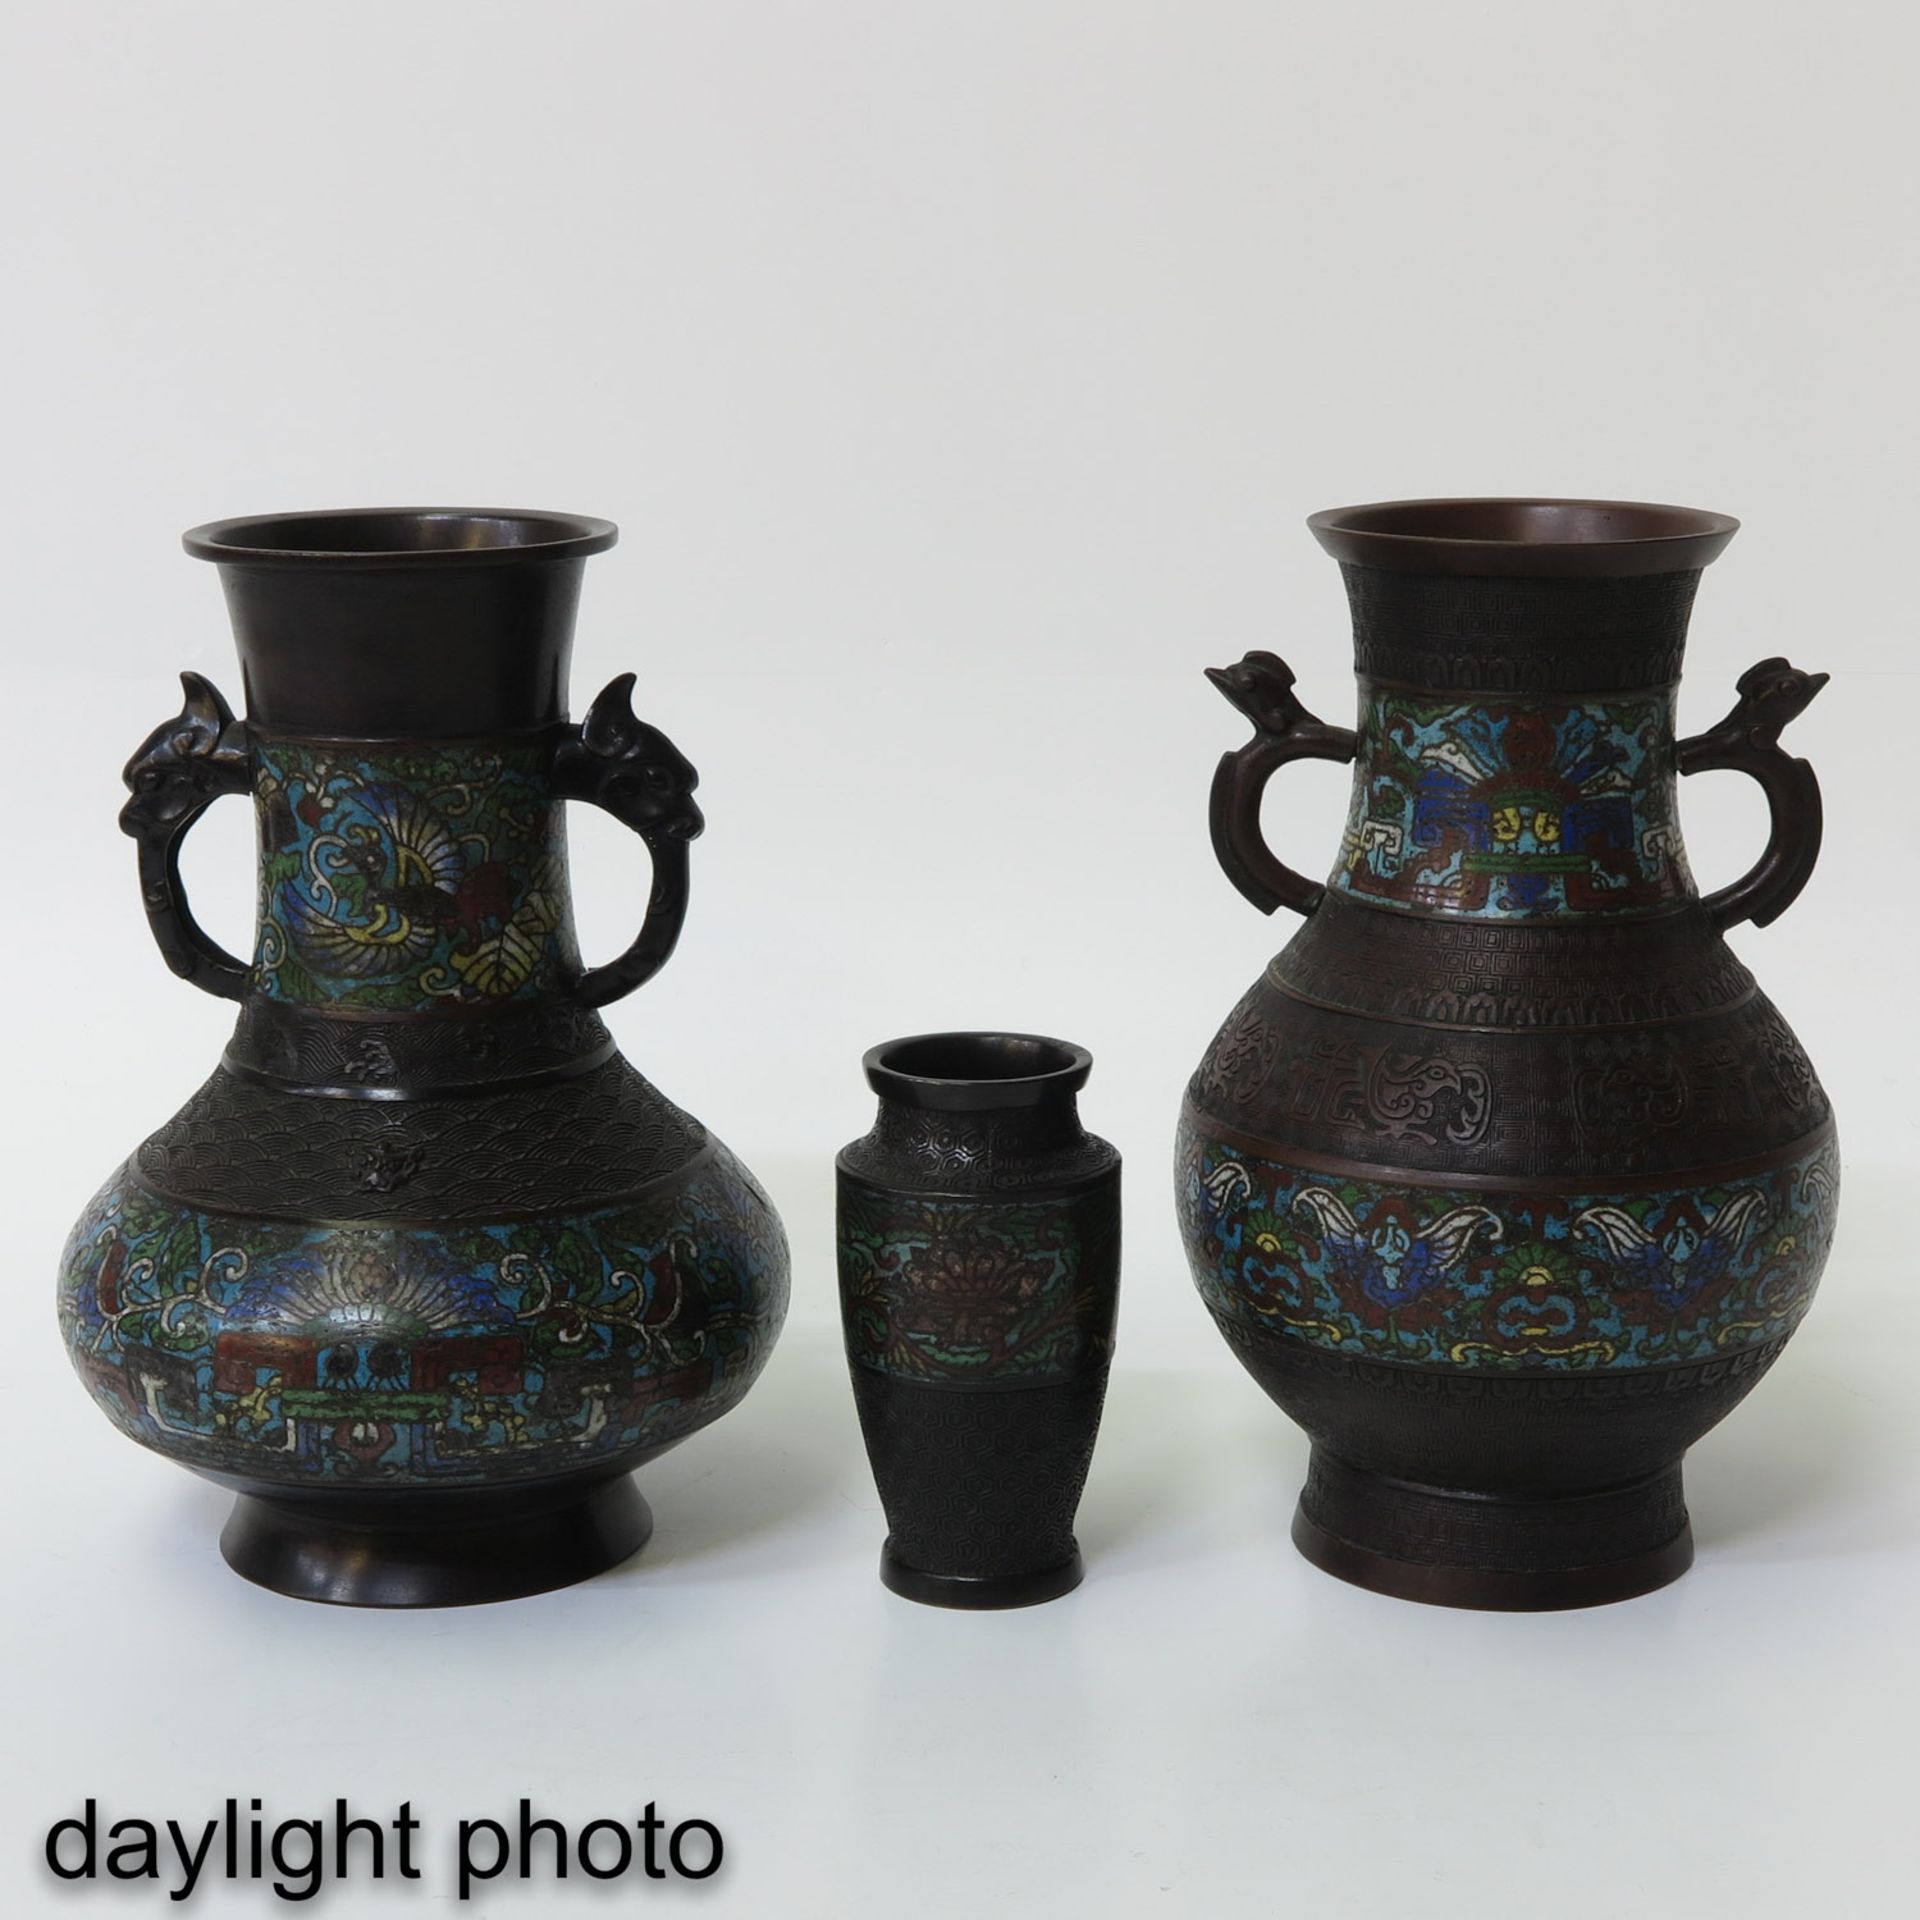 A Collection of 3 Cloisonne Vases - Image 7 of 10